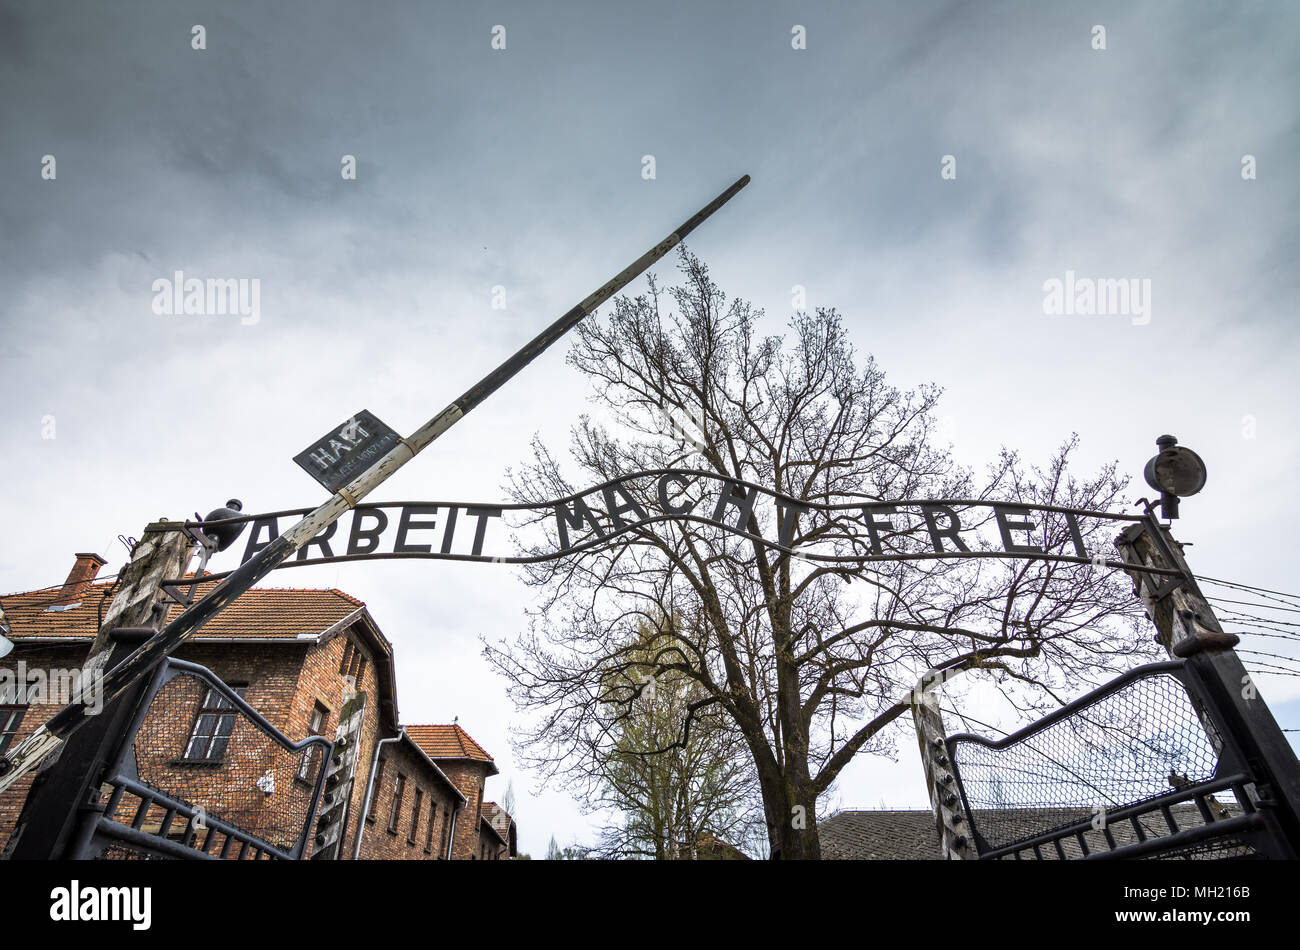 The main gate of the concentration camp Auschwitz with the inscription work makes you free, Auschwitz, Poland Stock Photo